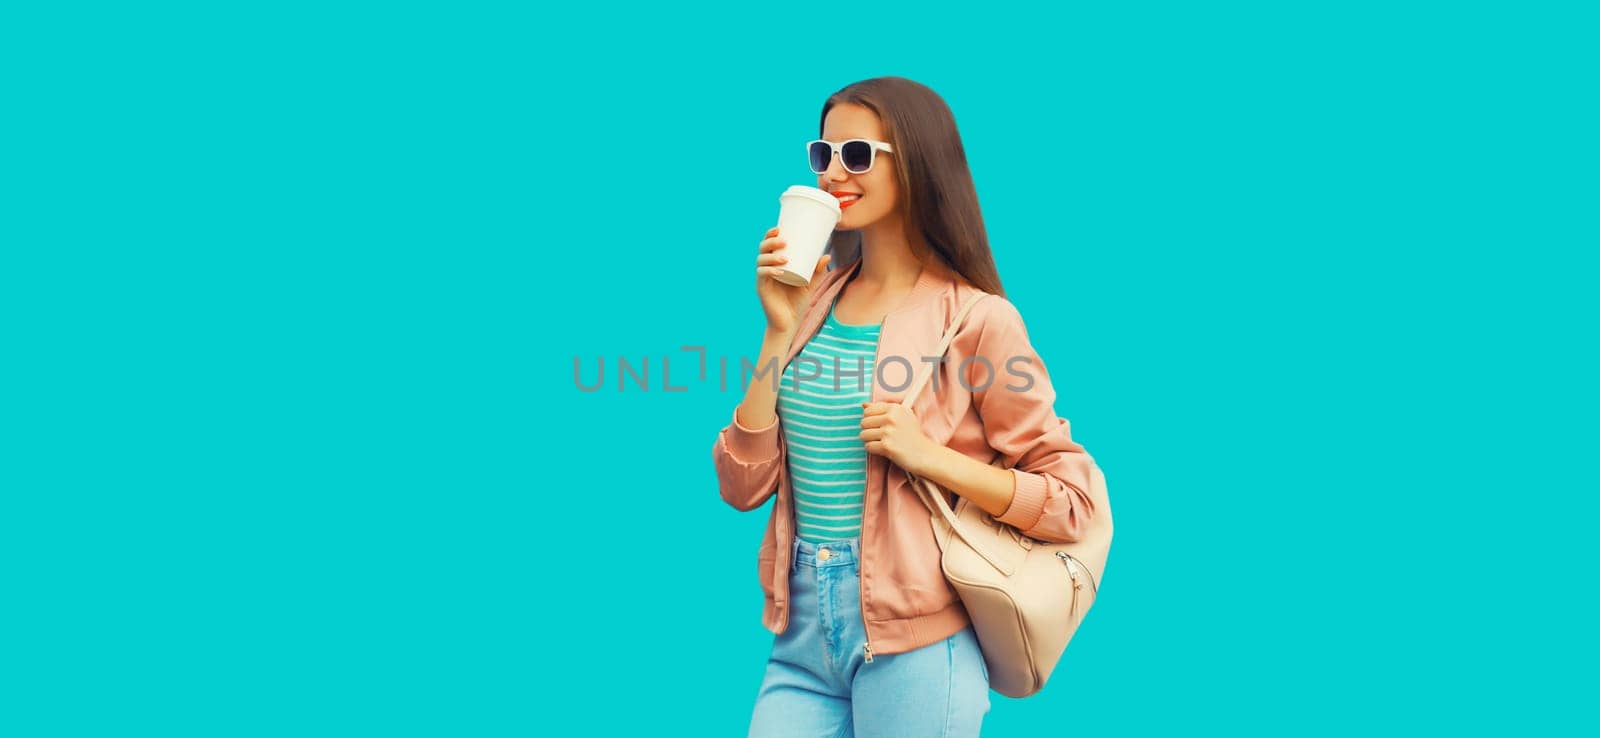 Portrait of smiling young woman drinking coffee wearing backpack on blue background by Rohappy